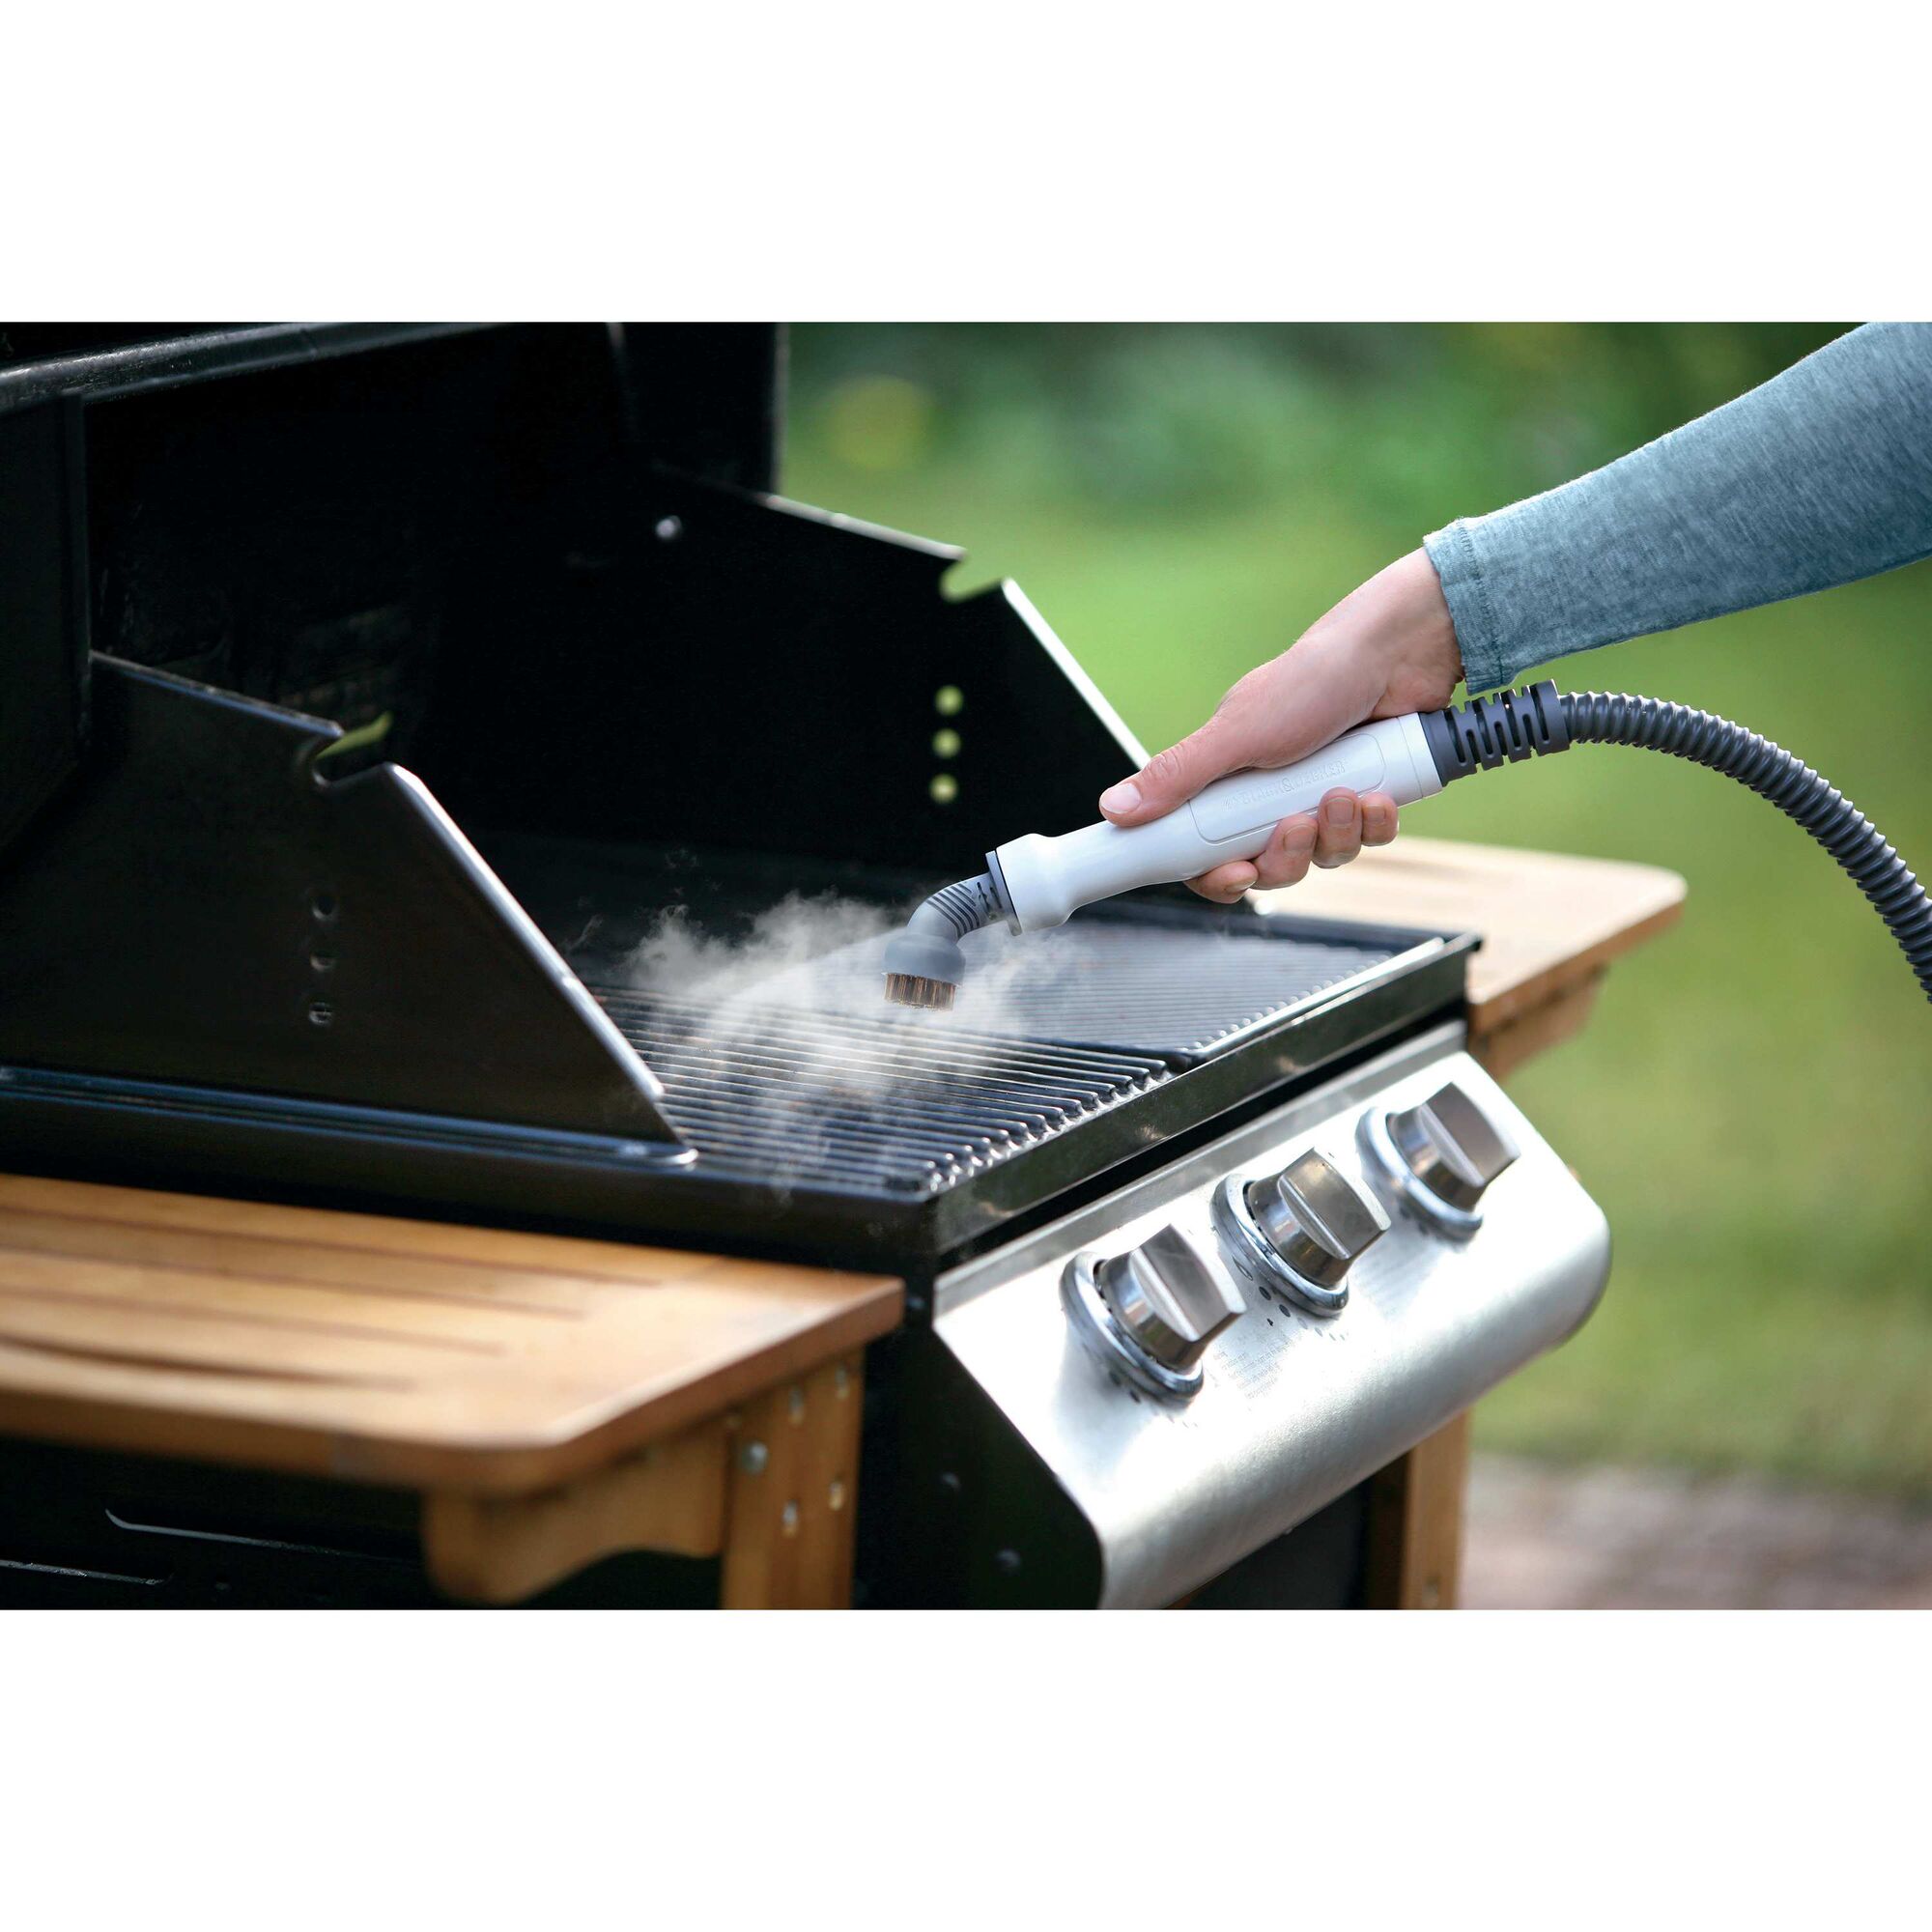 7 in 1 Steam Mop with steamglove handheld steamer being used to clean cooking grill.